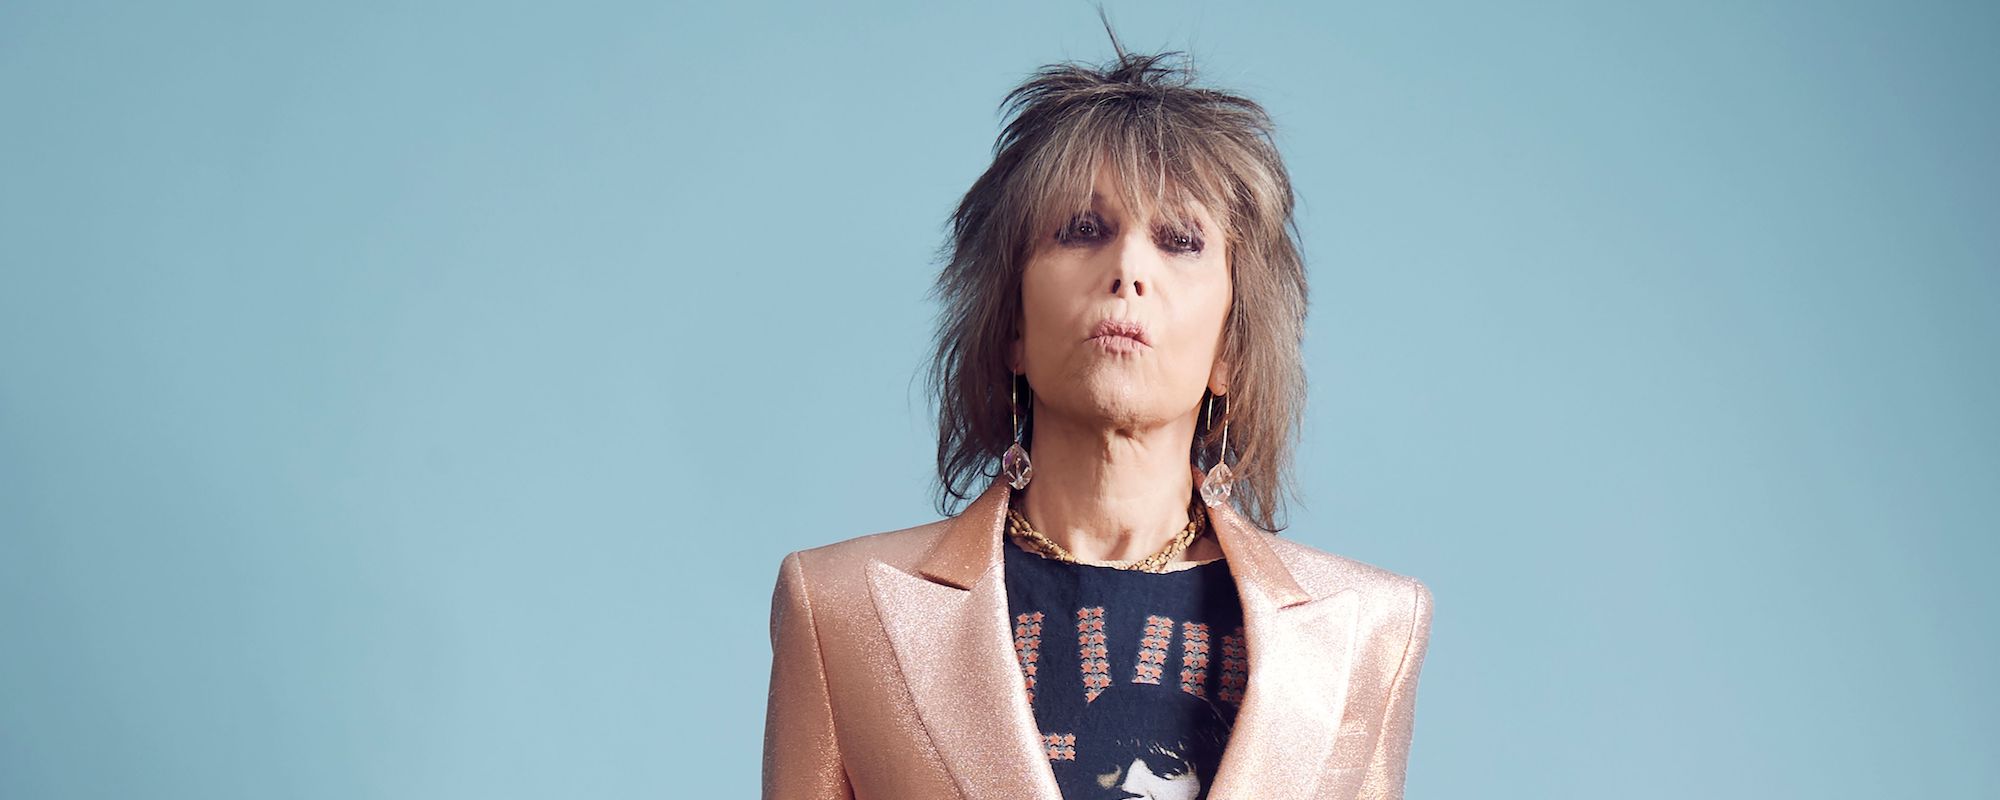 Listen: The Pretenders Share “Traditional” Song with “A Love”